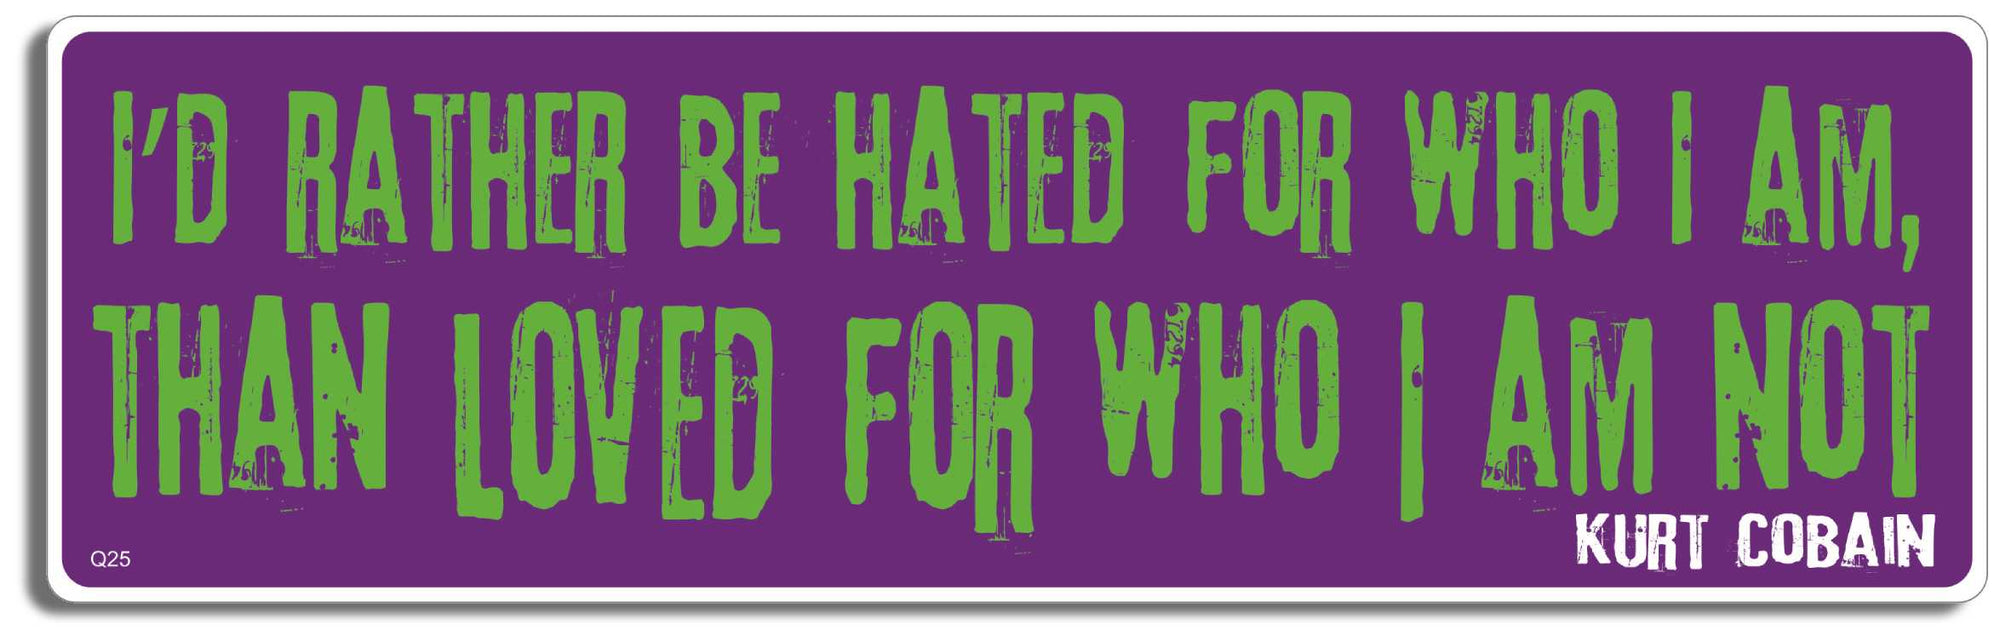 I'd rather be hated for who I am, than loved for who I am not - Kurt Cobain. -  3" x 10" Bumper Sticker--Car Magnet- -  Decal Bumper Sticker-quotation Bumper Sticker Car Magnet I'd rather be hated for who I am,-  Decal for carsgrunge, kurt cobain, metal, Music, nirvana, punk, rock